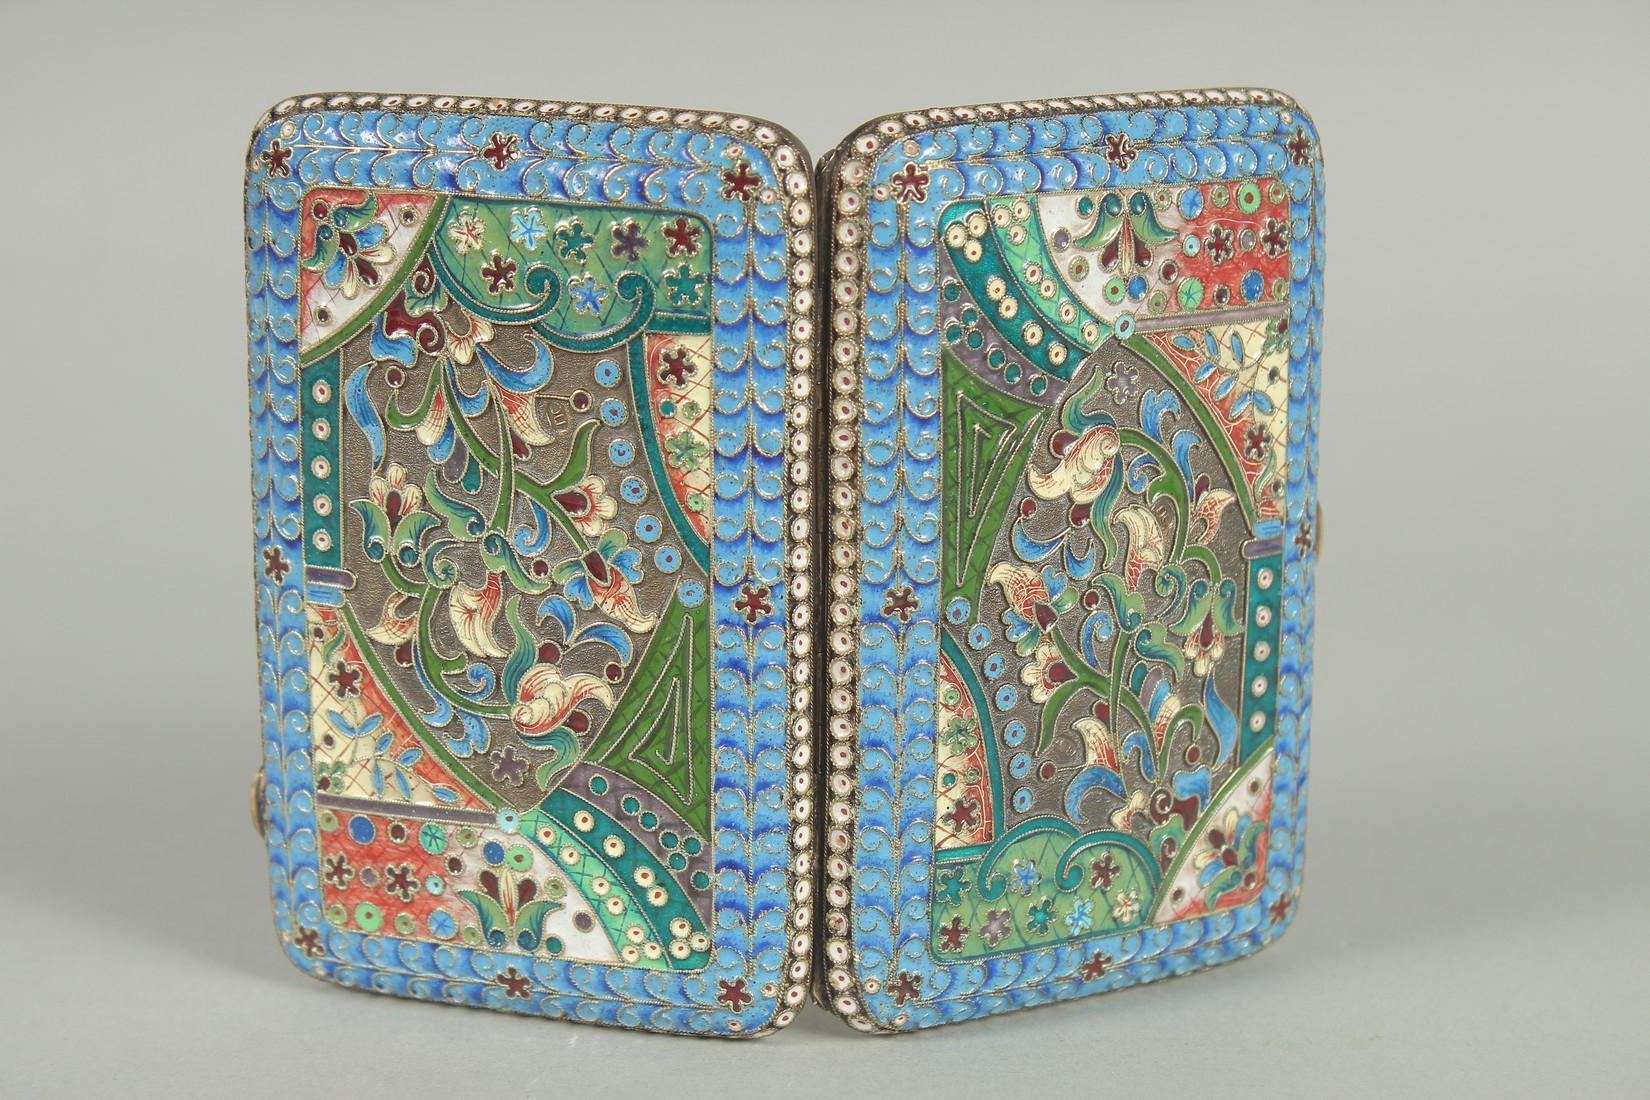 A RUSSIAN SILVER AND ENAMEL CIGARETTE CASE. 10cm x 6.5cm Weight: 119gms. - Image 4 of 4